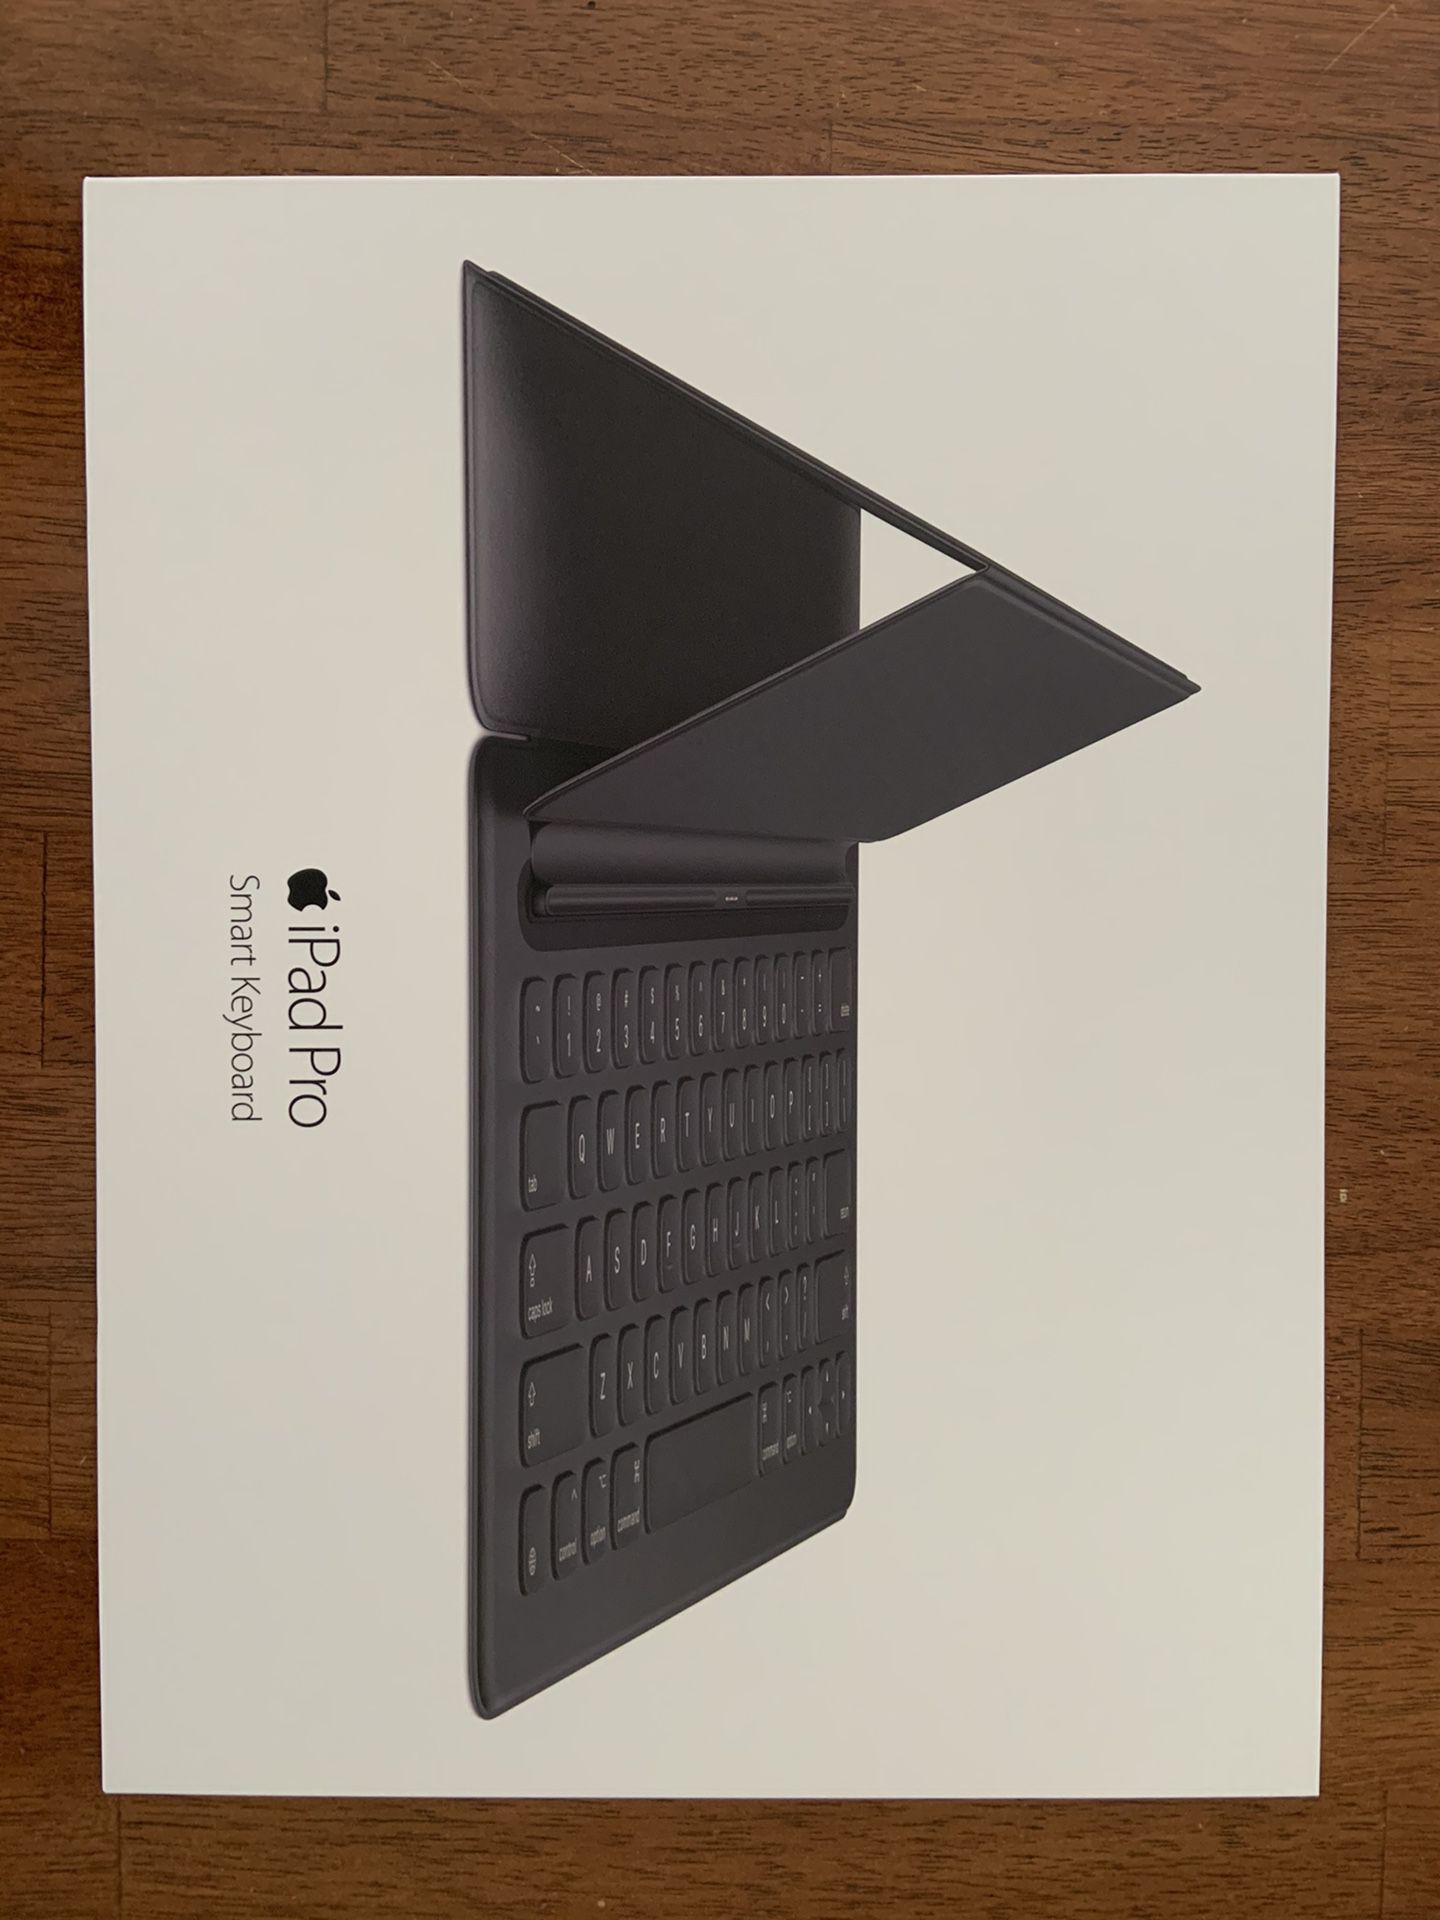 Apple Smart Keyboard for 12.9-inch iPad Pro 2nd Generation / 1st Generation - Gray (MJYR2LL/A) * NEW * NEW * NEW - never ever used!